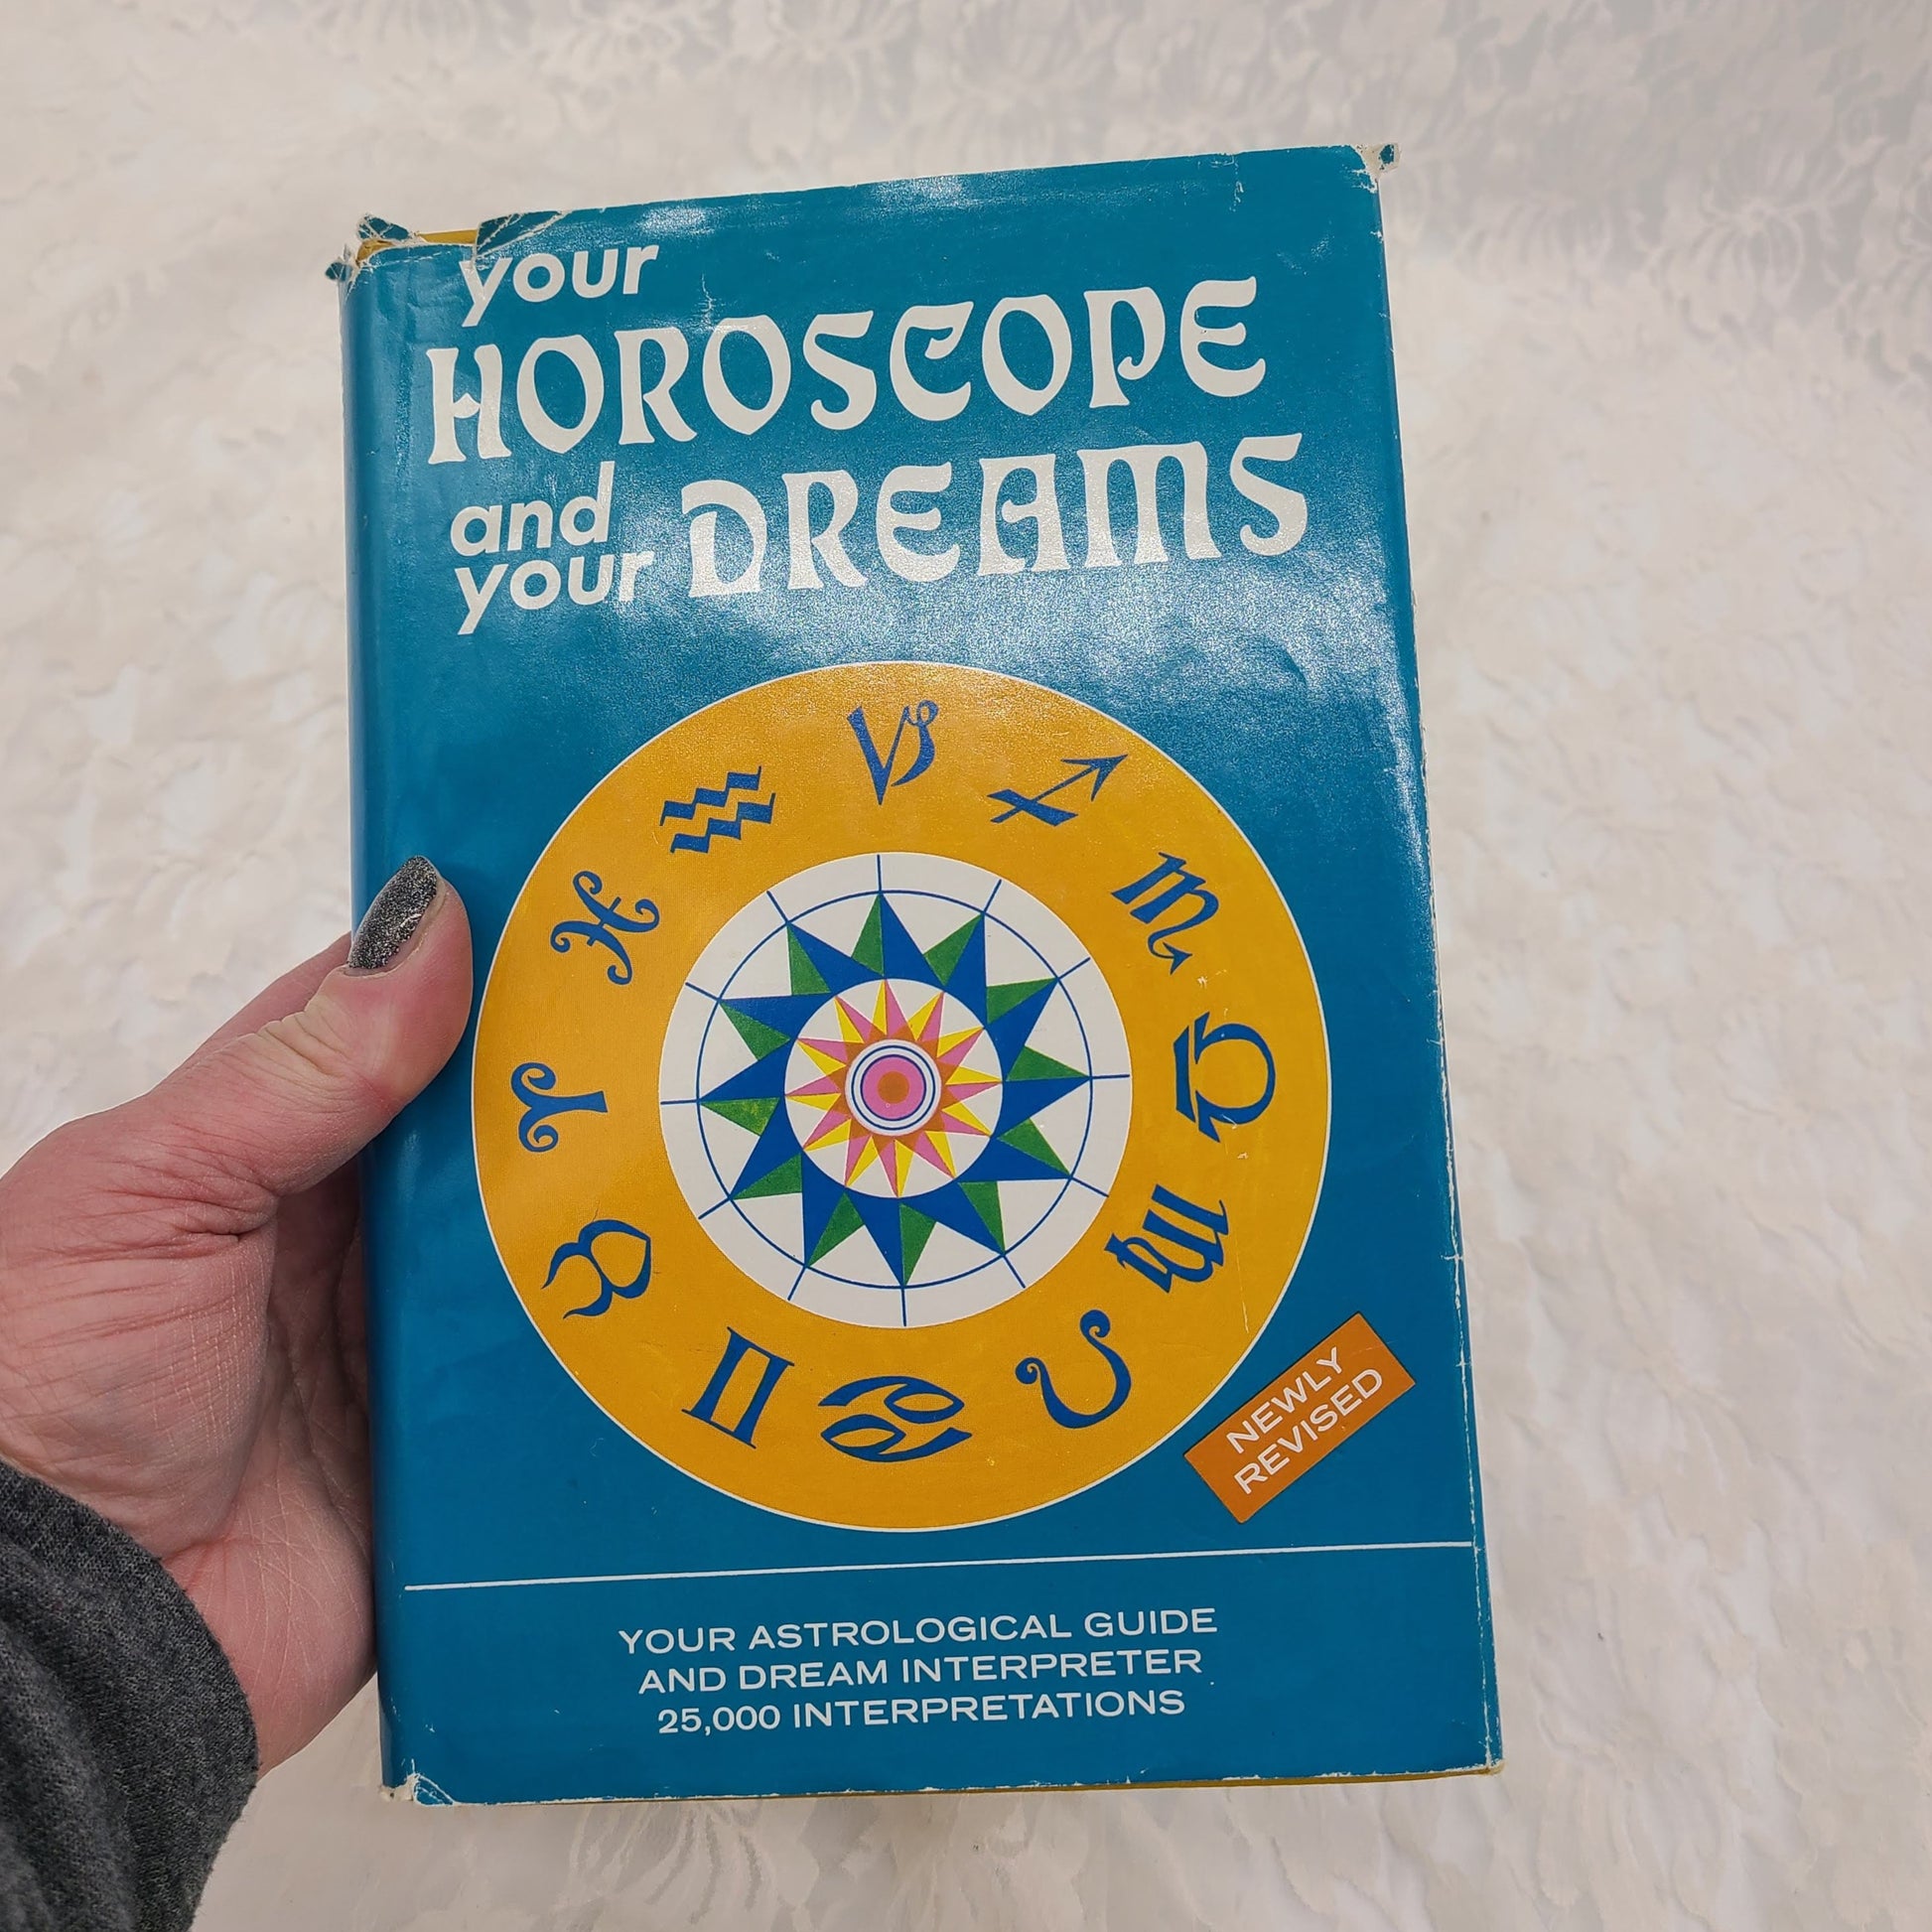 Your horoscope and your dreams 25,000 interpretations of the predictions of the sun, moon, and stars and of the messages received in sleep